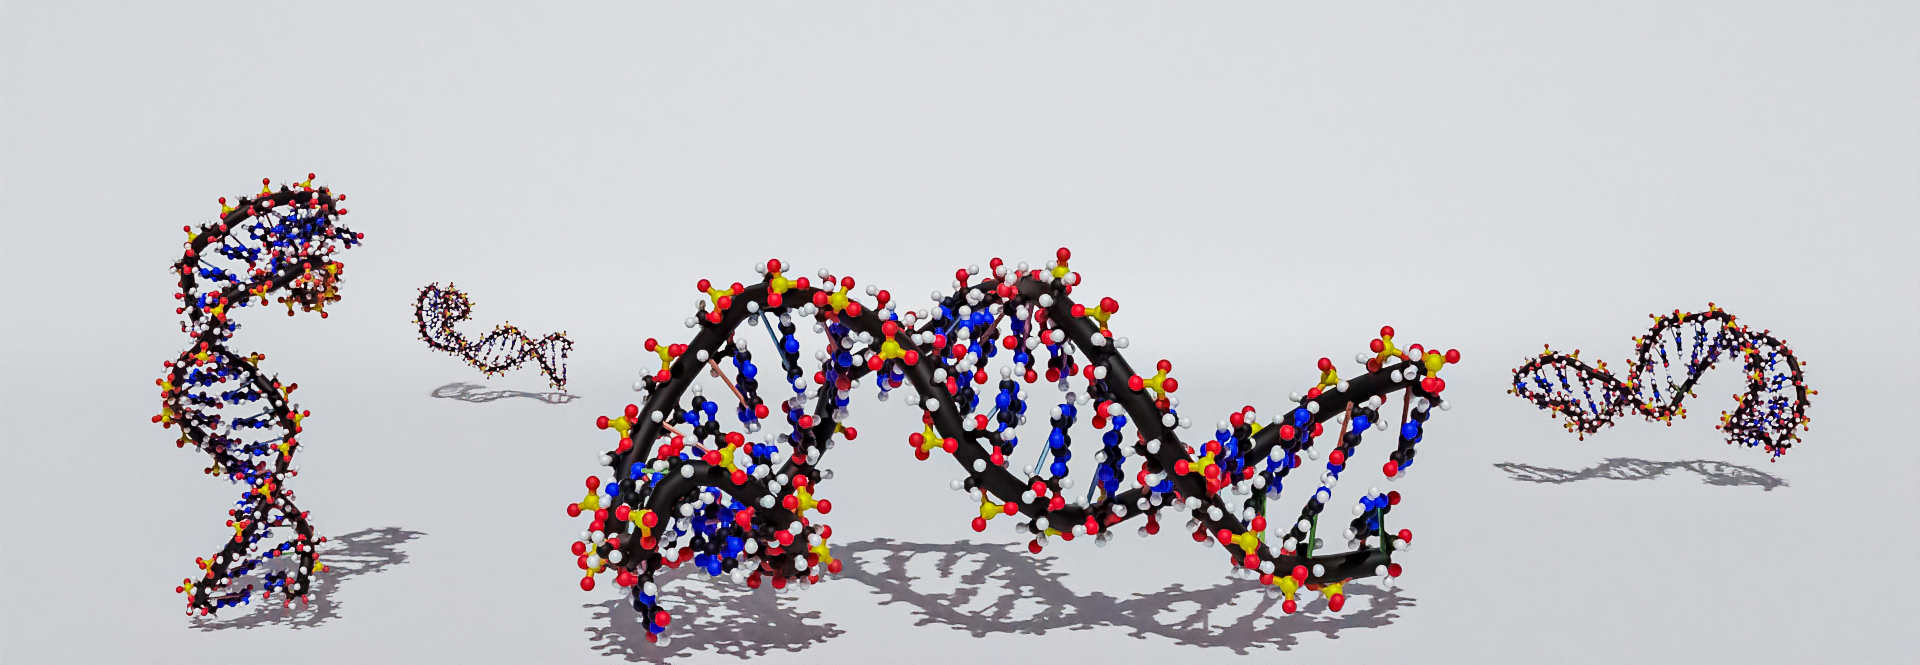 DNA/RNA Sequencing. 3D render of a DNA double helix